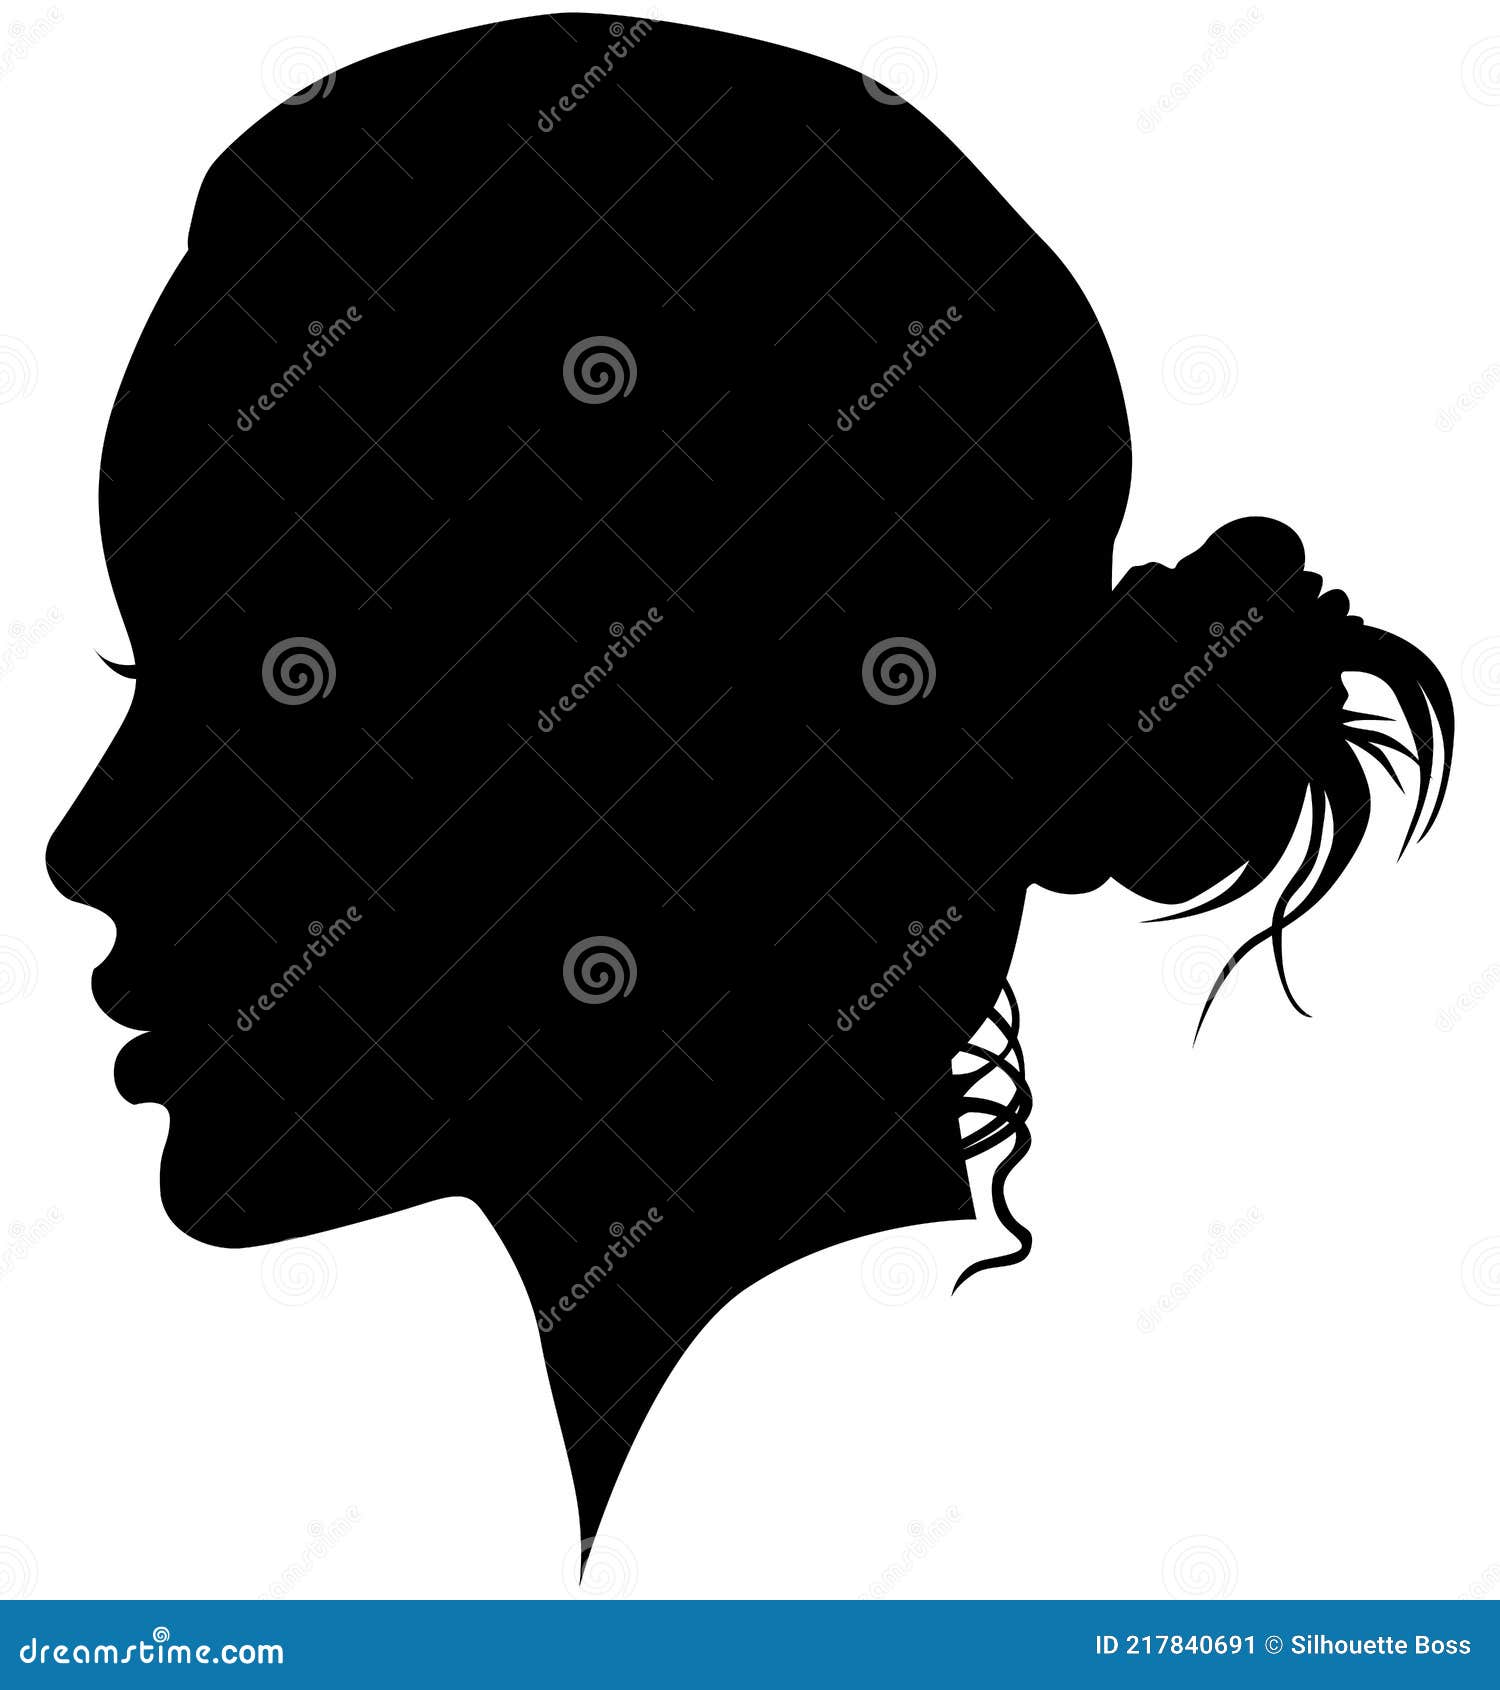 western european white woman, girl from the side profile picture with a topknot, updo bun hairstyle on the back of a head. isola